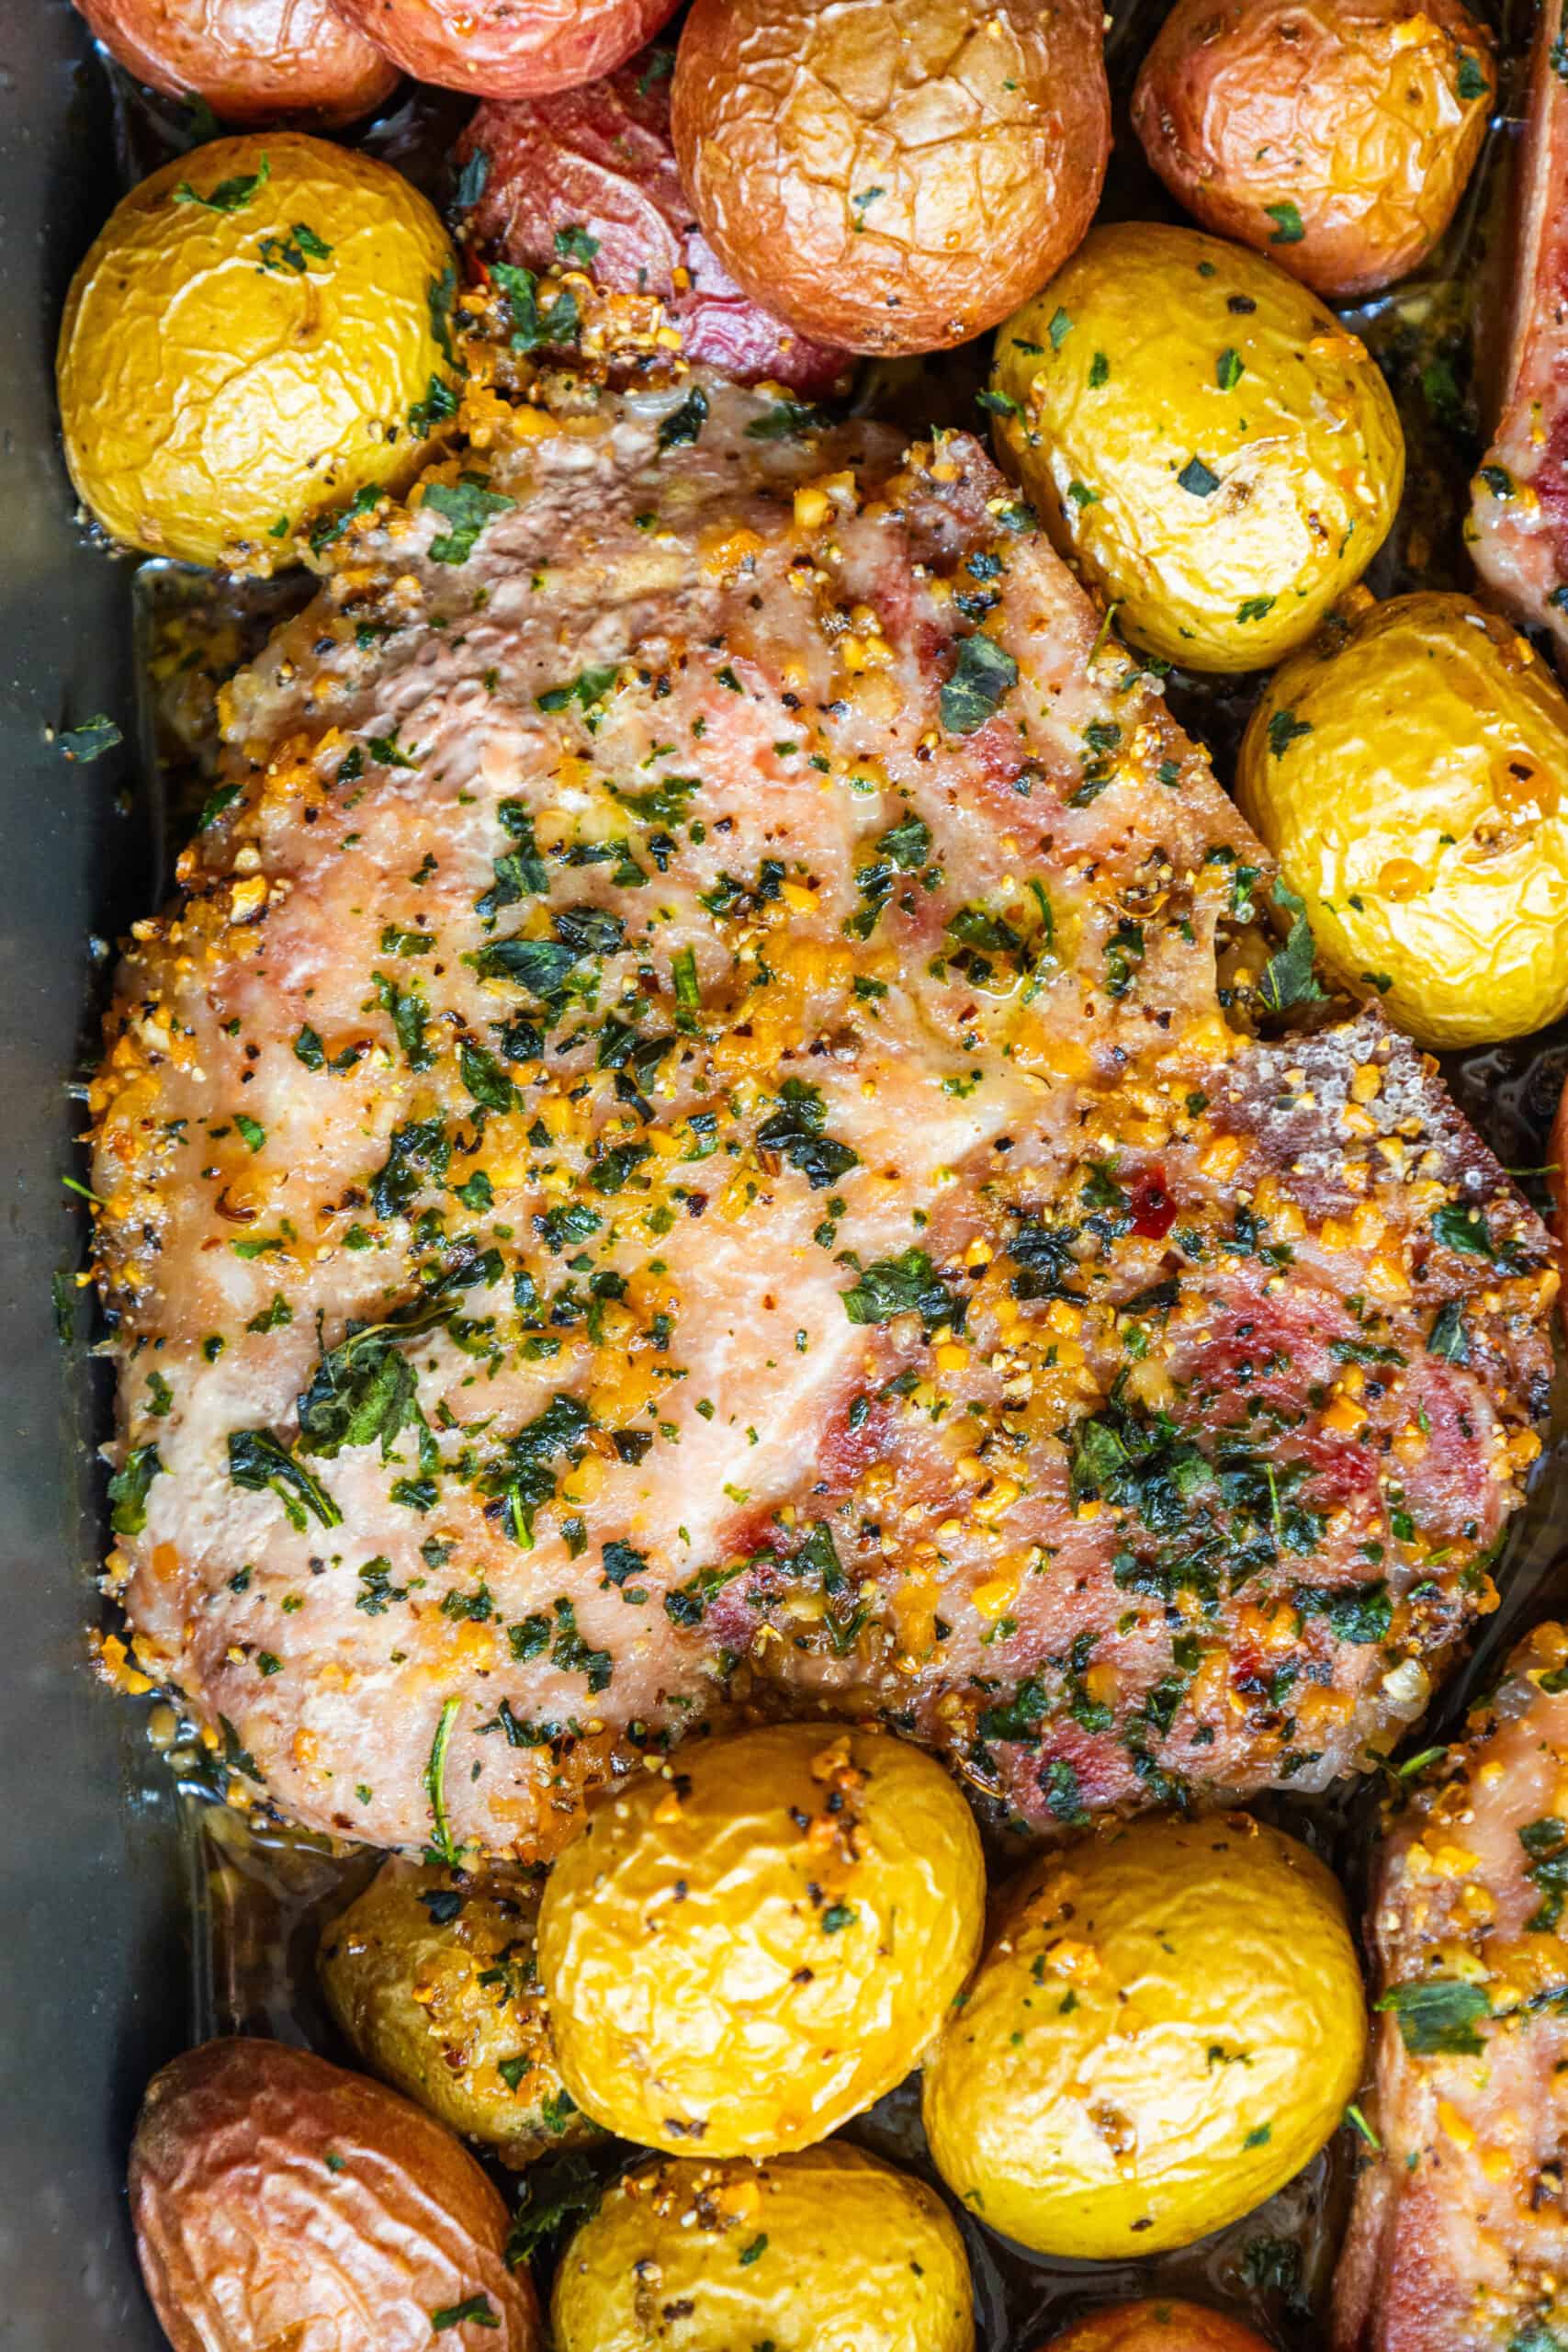 Pork chops and potatoes in a baking dish. This mouthwatering dish combines tender pork chops with golden-brown potatoes, creating a satisfying and hearty dinner option. The pork chops are beautifully seasoned and